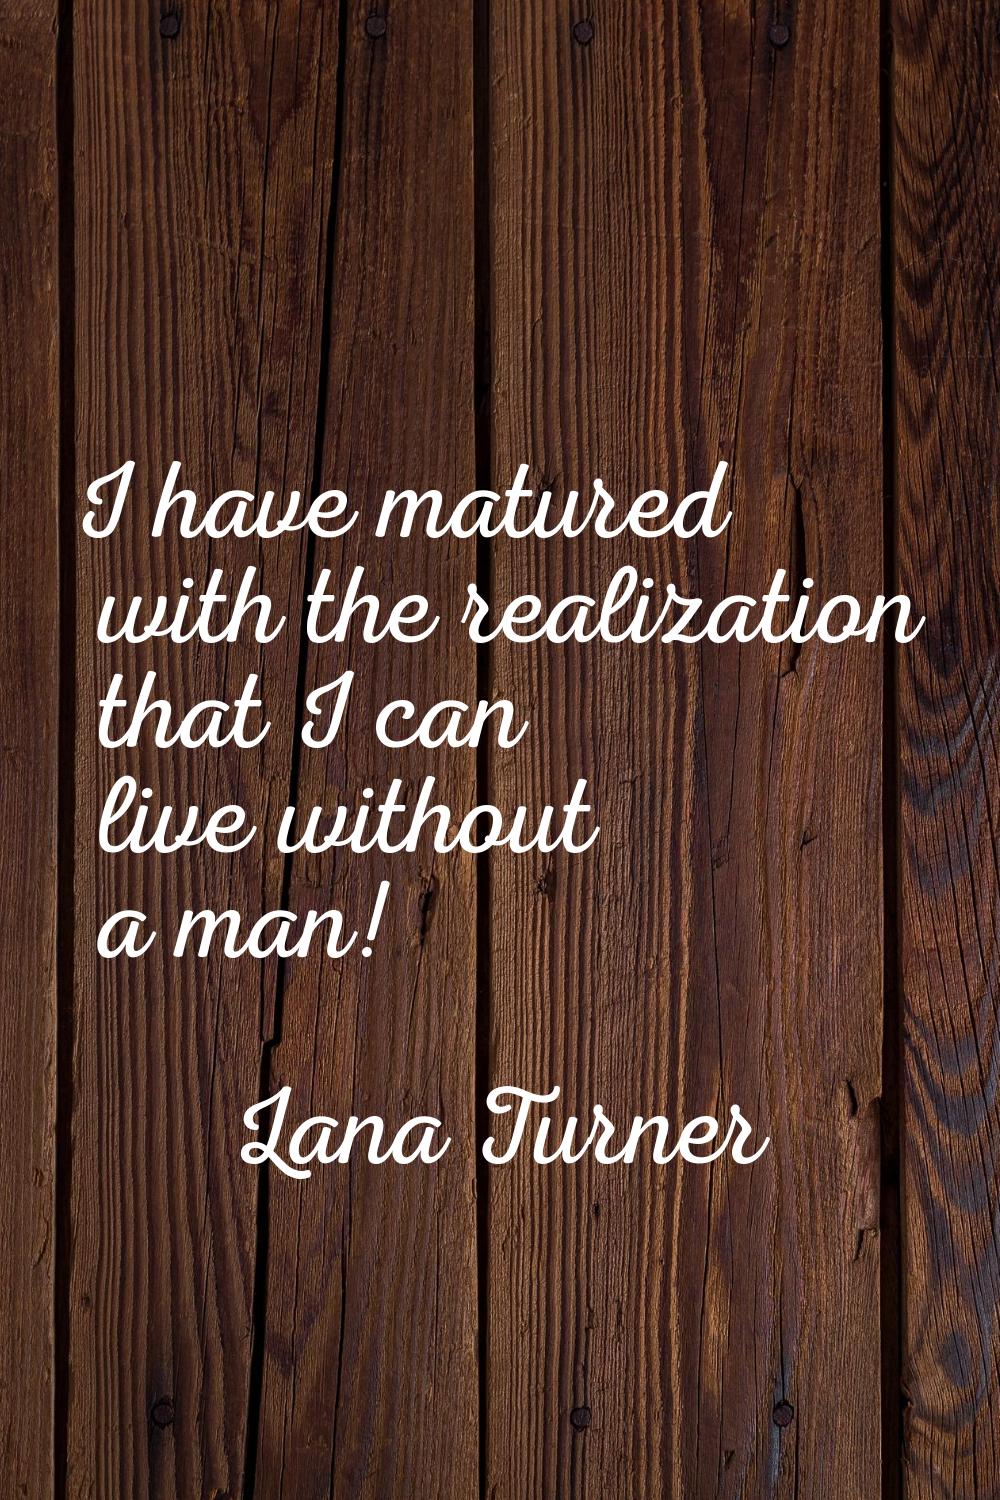 I have matured with the realization that I can live without a man!